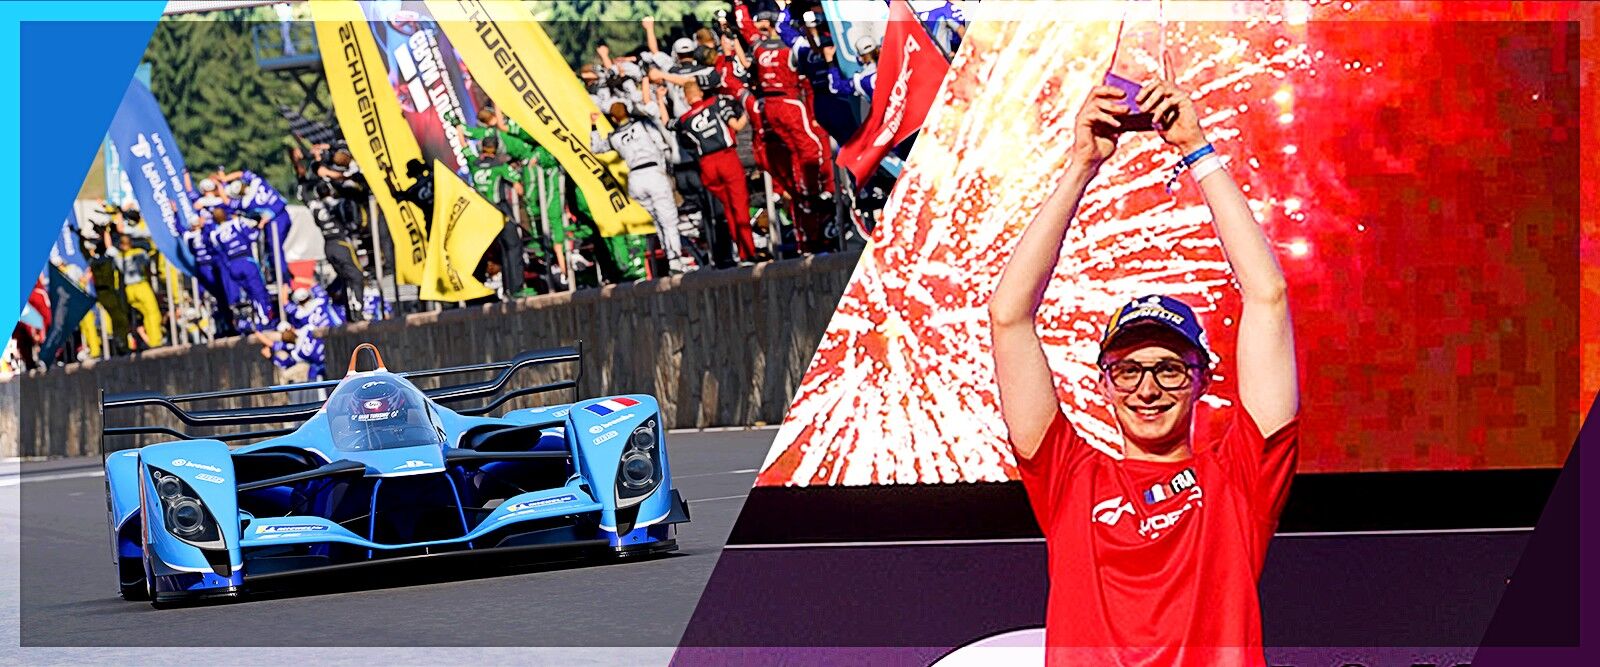 An image of Kylian Drumont lifting a trophy, alongside an image of him driving in Gran Turismo 7.